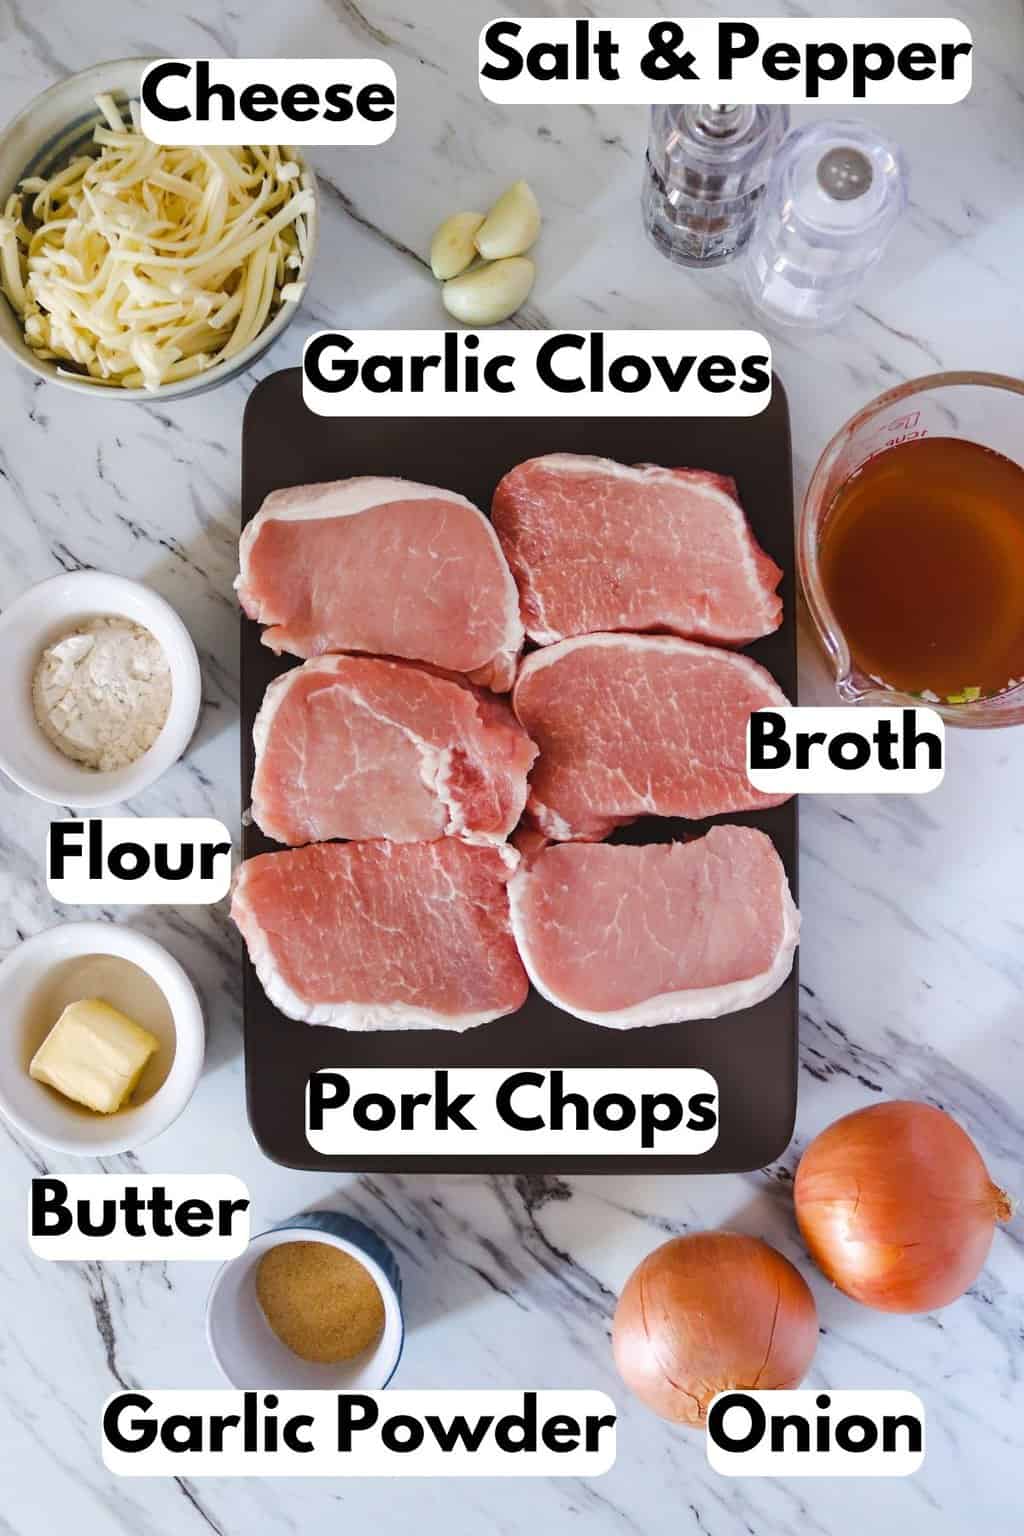 Ingredients for this pork chop recipe.